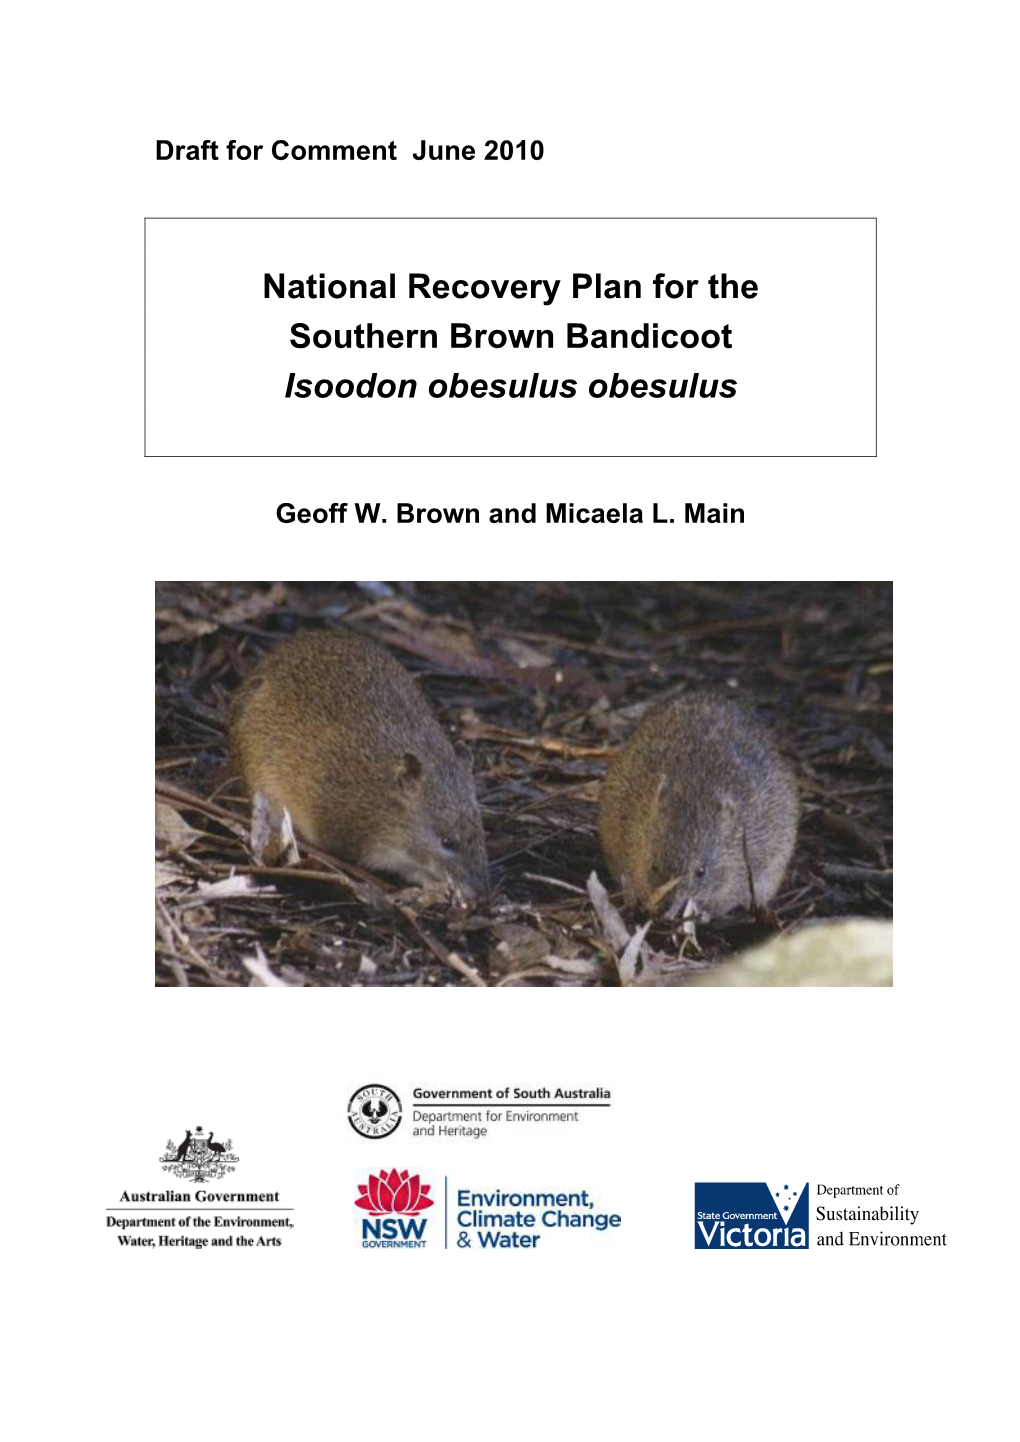 National Recovery Plan for the Southern Brown Bandicoot Isoodon Obesulus Obesulus